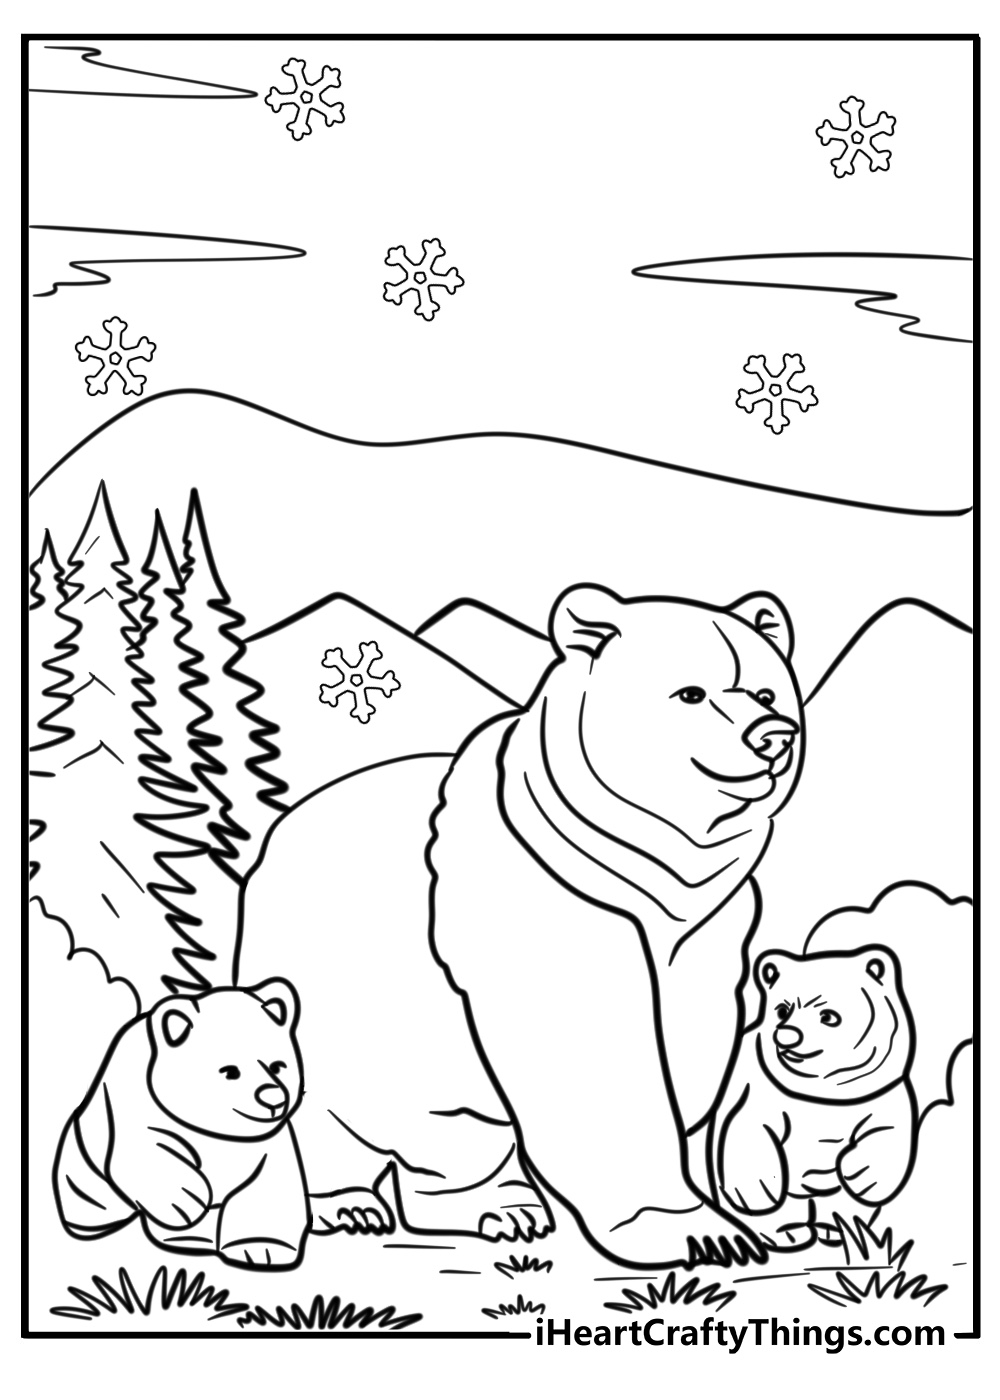 Mama bear coloring page walking with her two cubs in forest